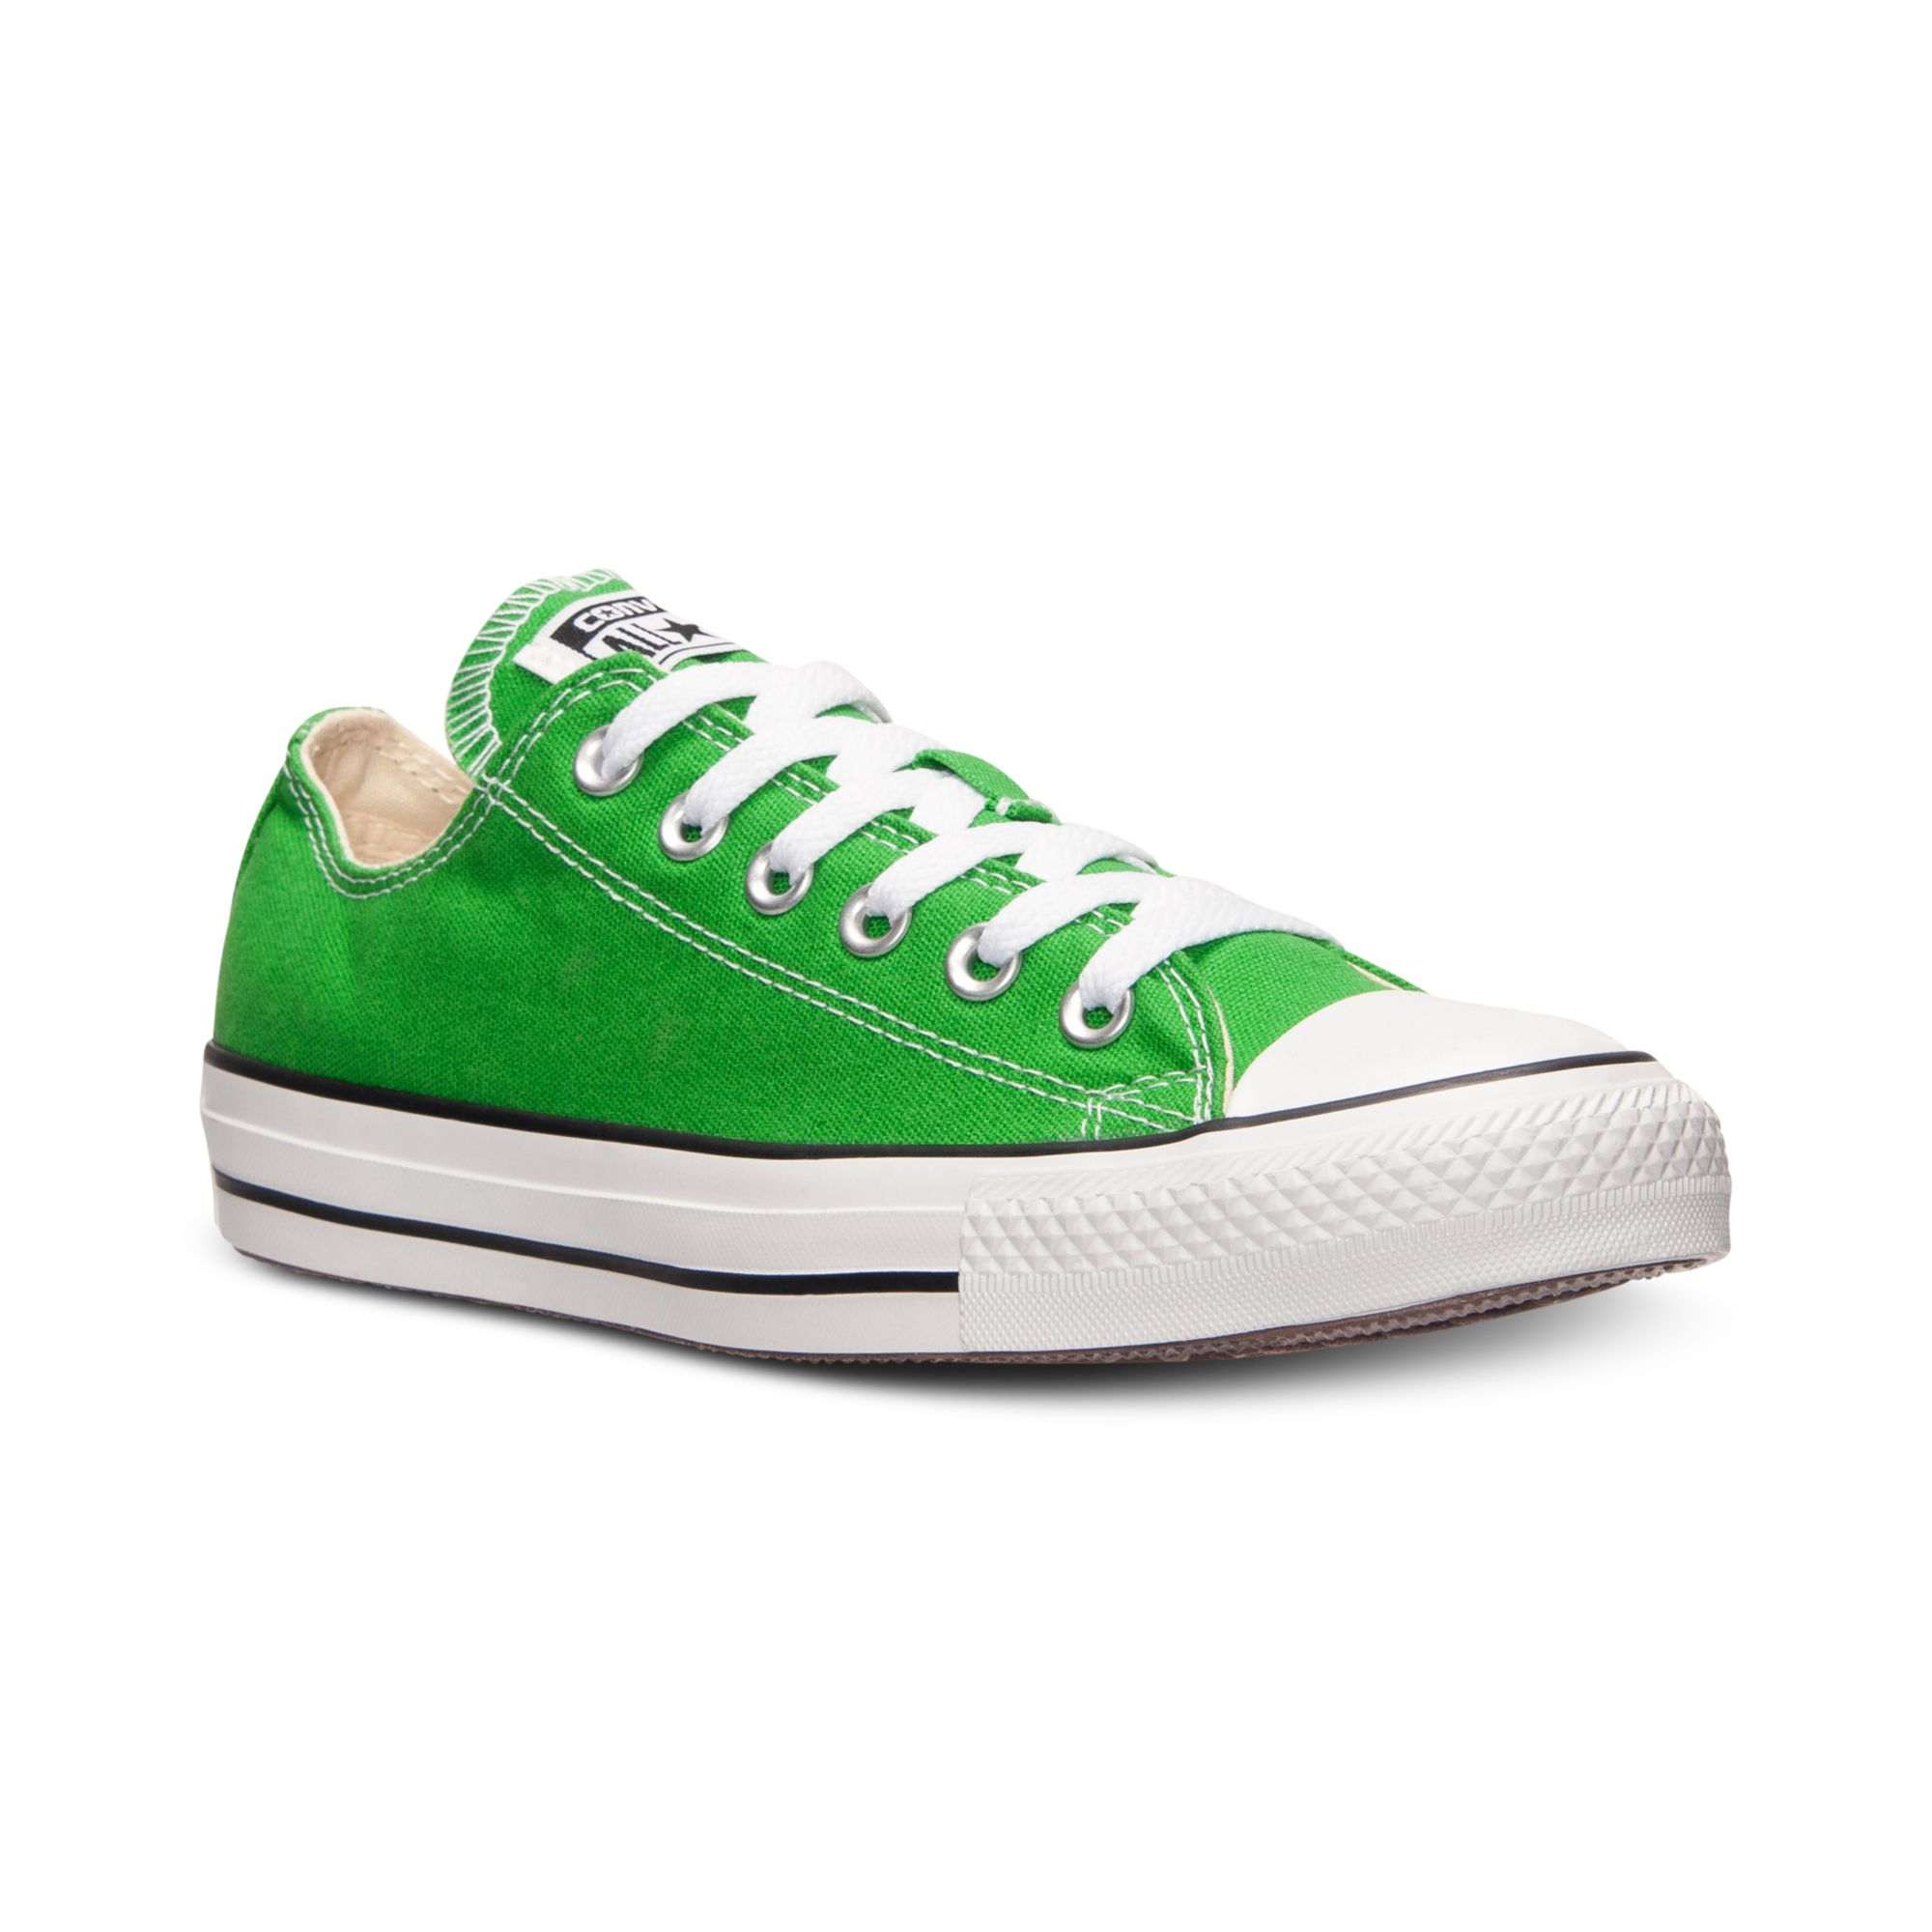 Lyst - Converse Mens Chuck Taylor Ox Casual Sneakers From Finish Line ...